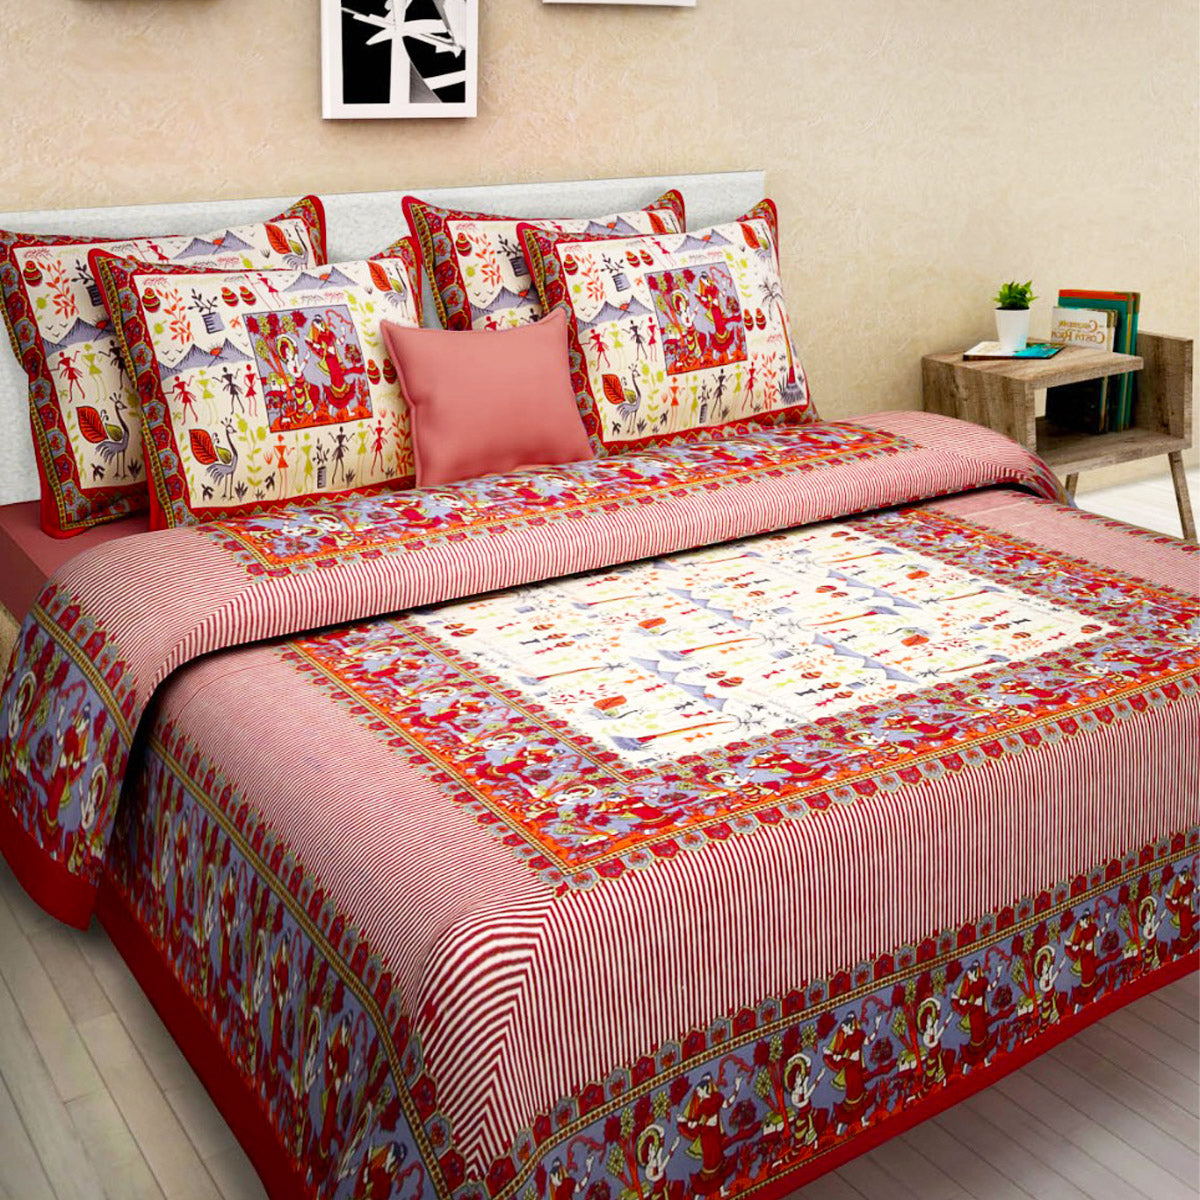 Organic Vibes Red Garba Design Striped Cotton Bed Cover with Pillows